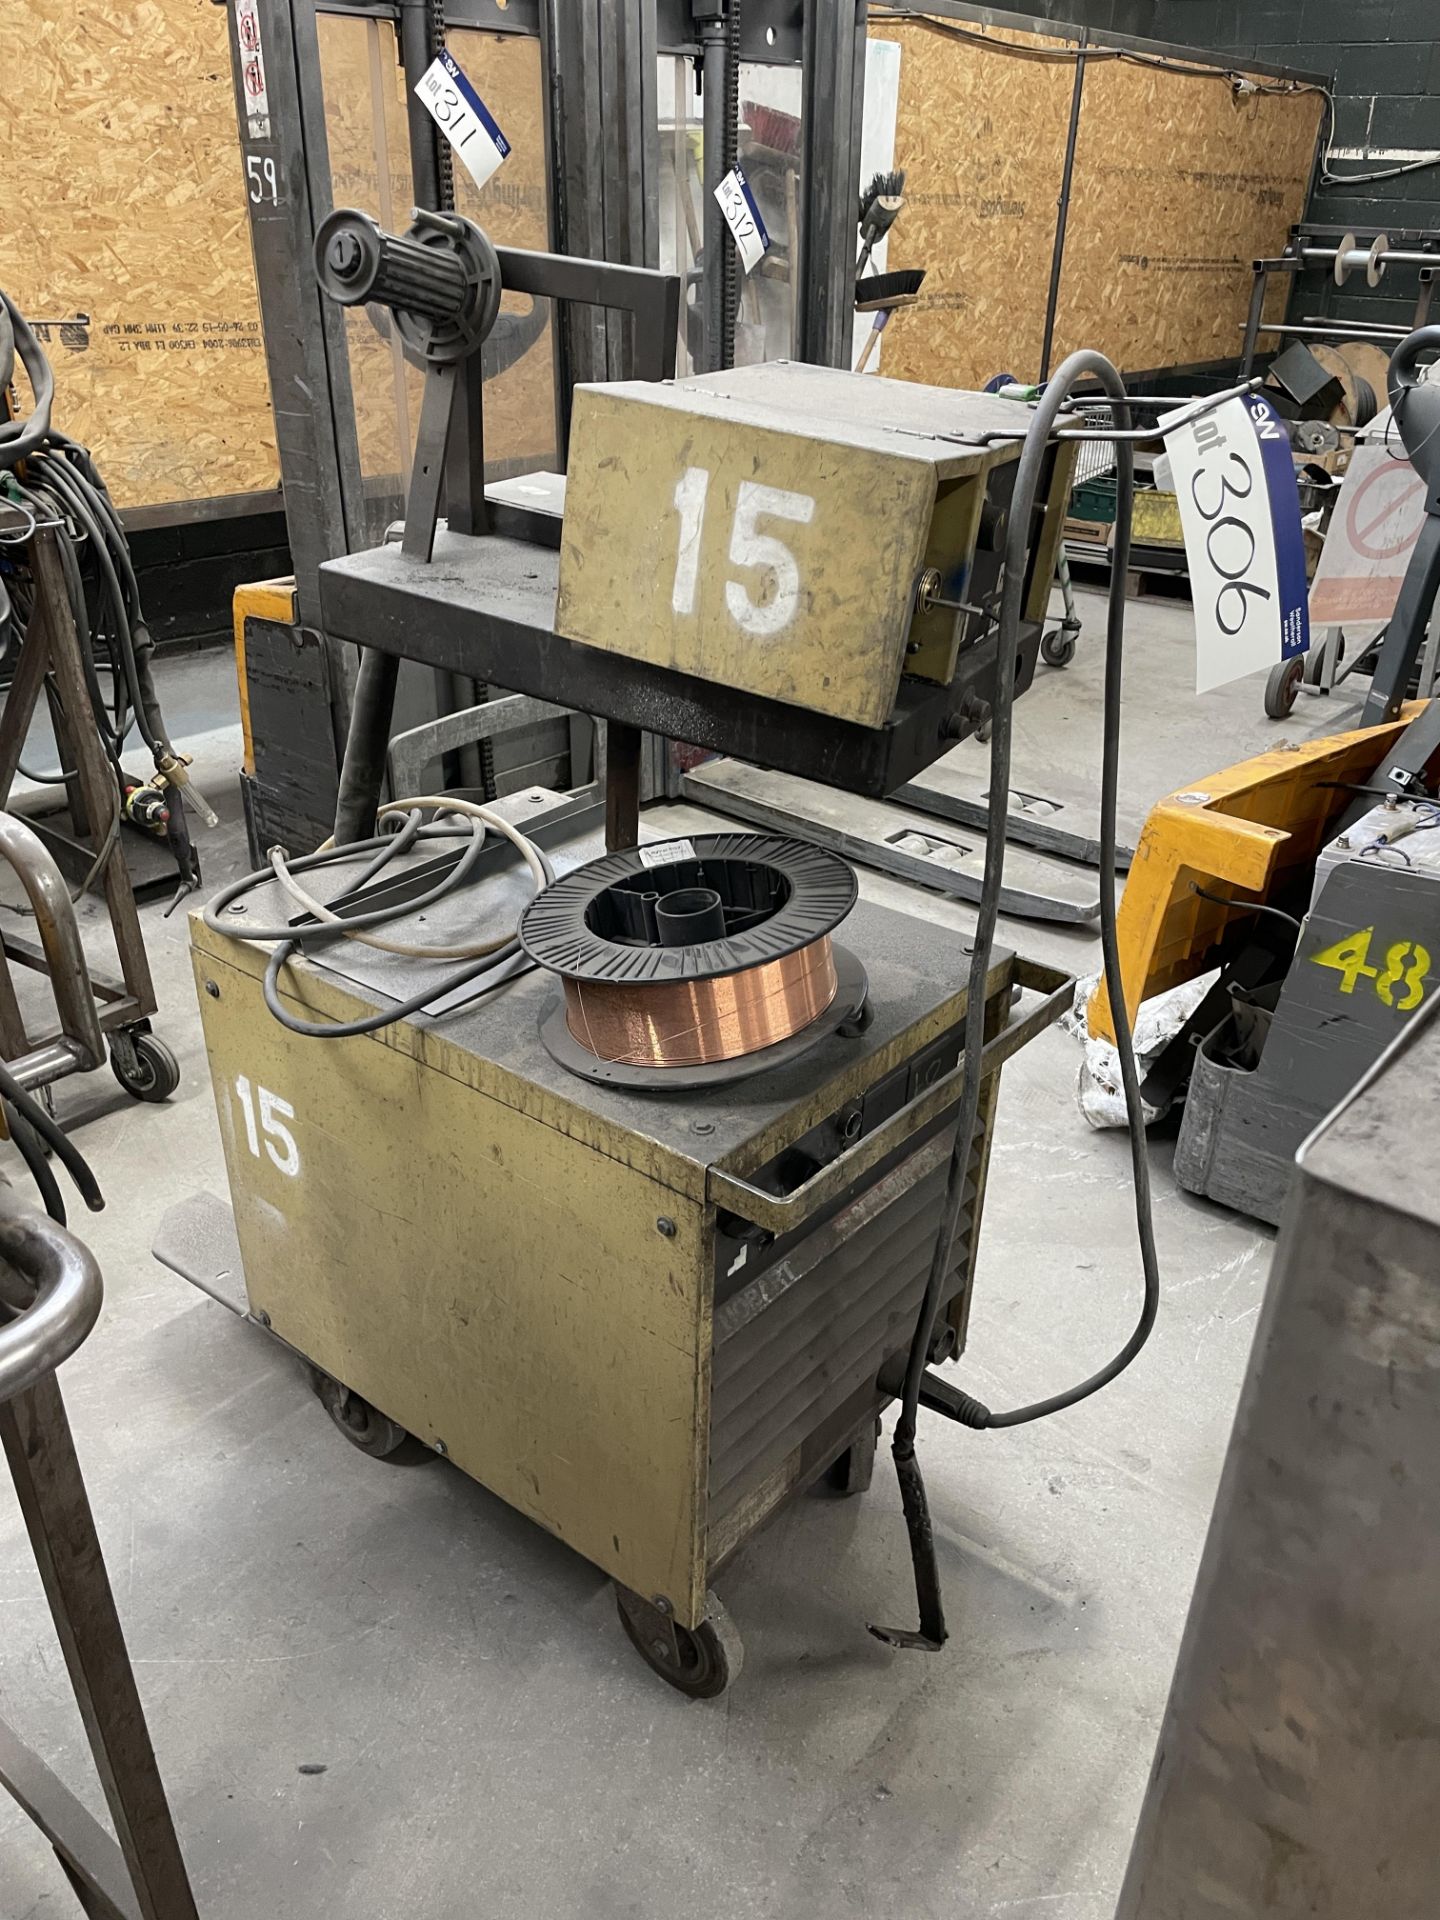 Hobart RC 250 Mig Welder, with H-1000 wire feed unit Please read the following important